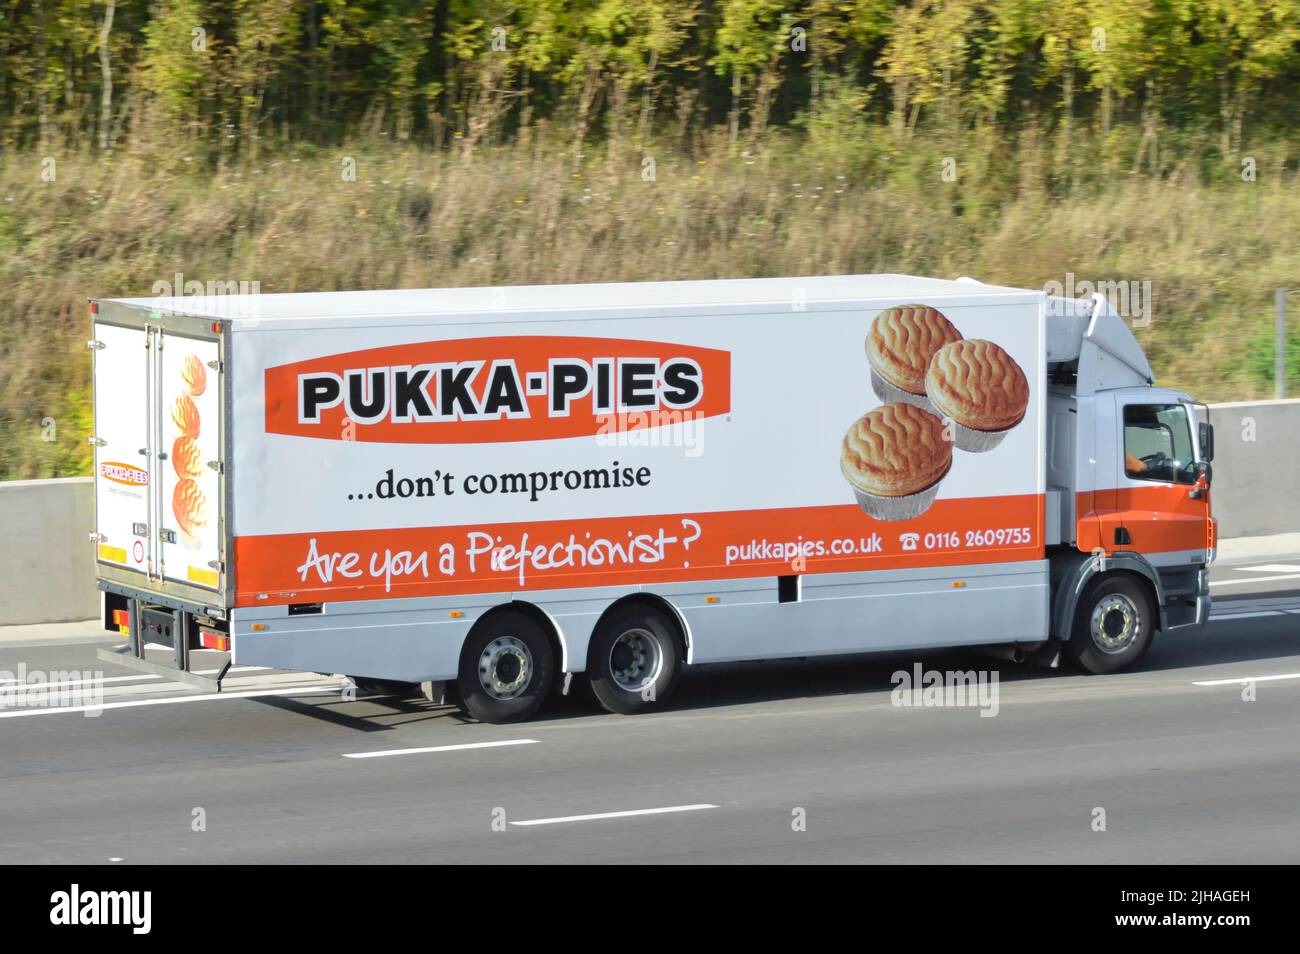 Advertising graphics on side & back view of rigid body hgv chassis cab supply chain lorry truck for Pukka-Pies food brand business driving on UK road Stock Photo